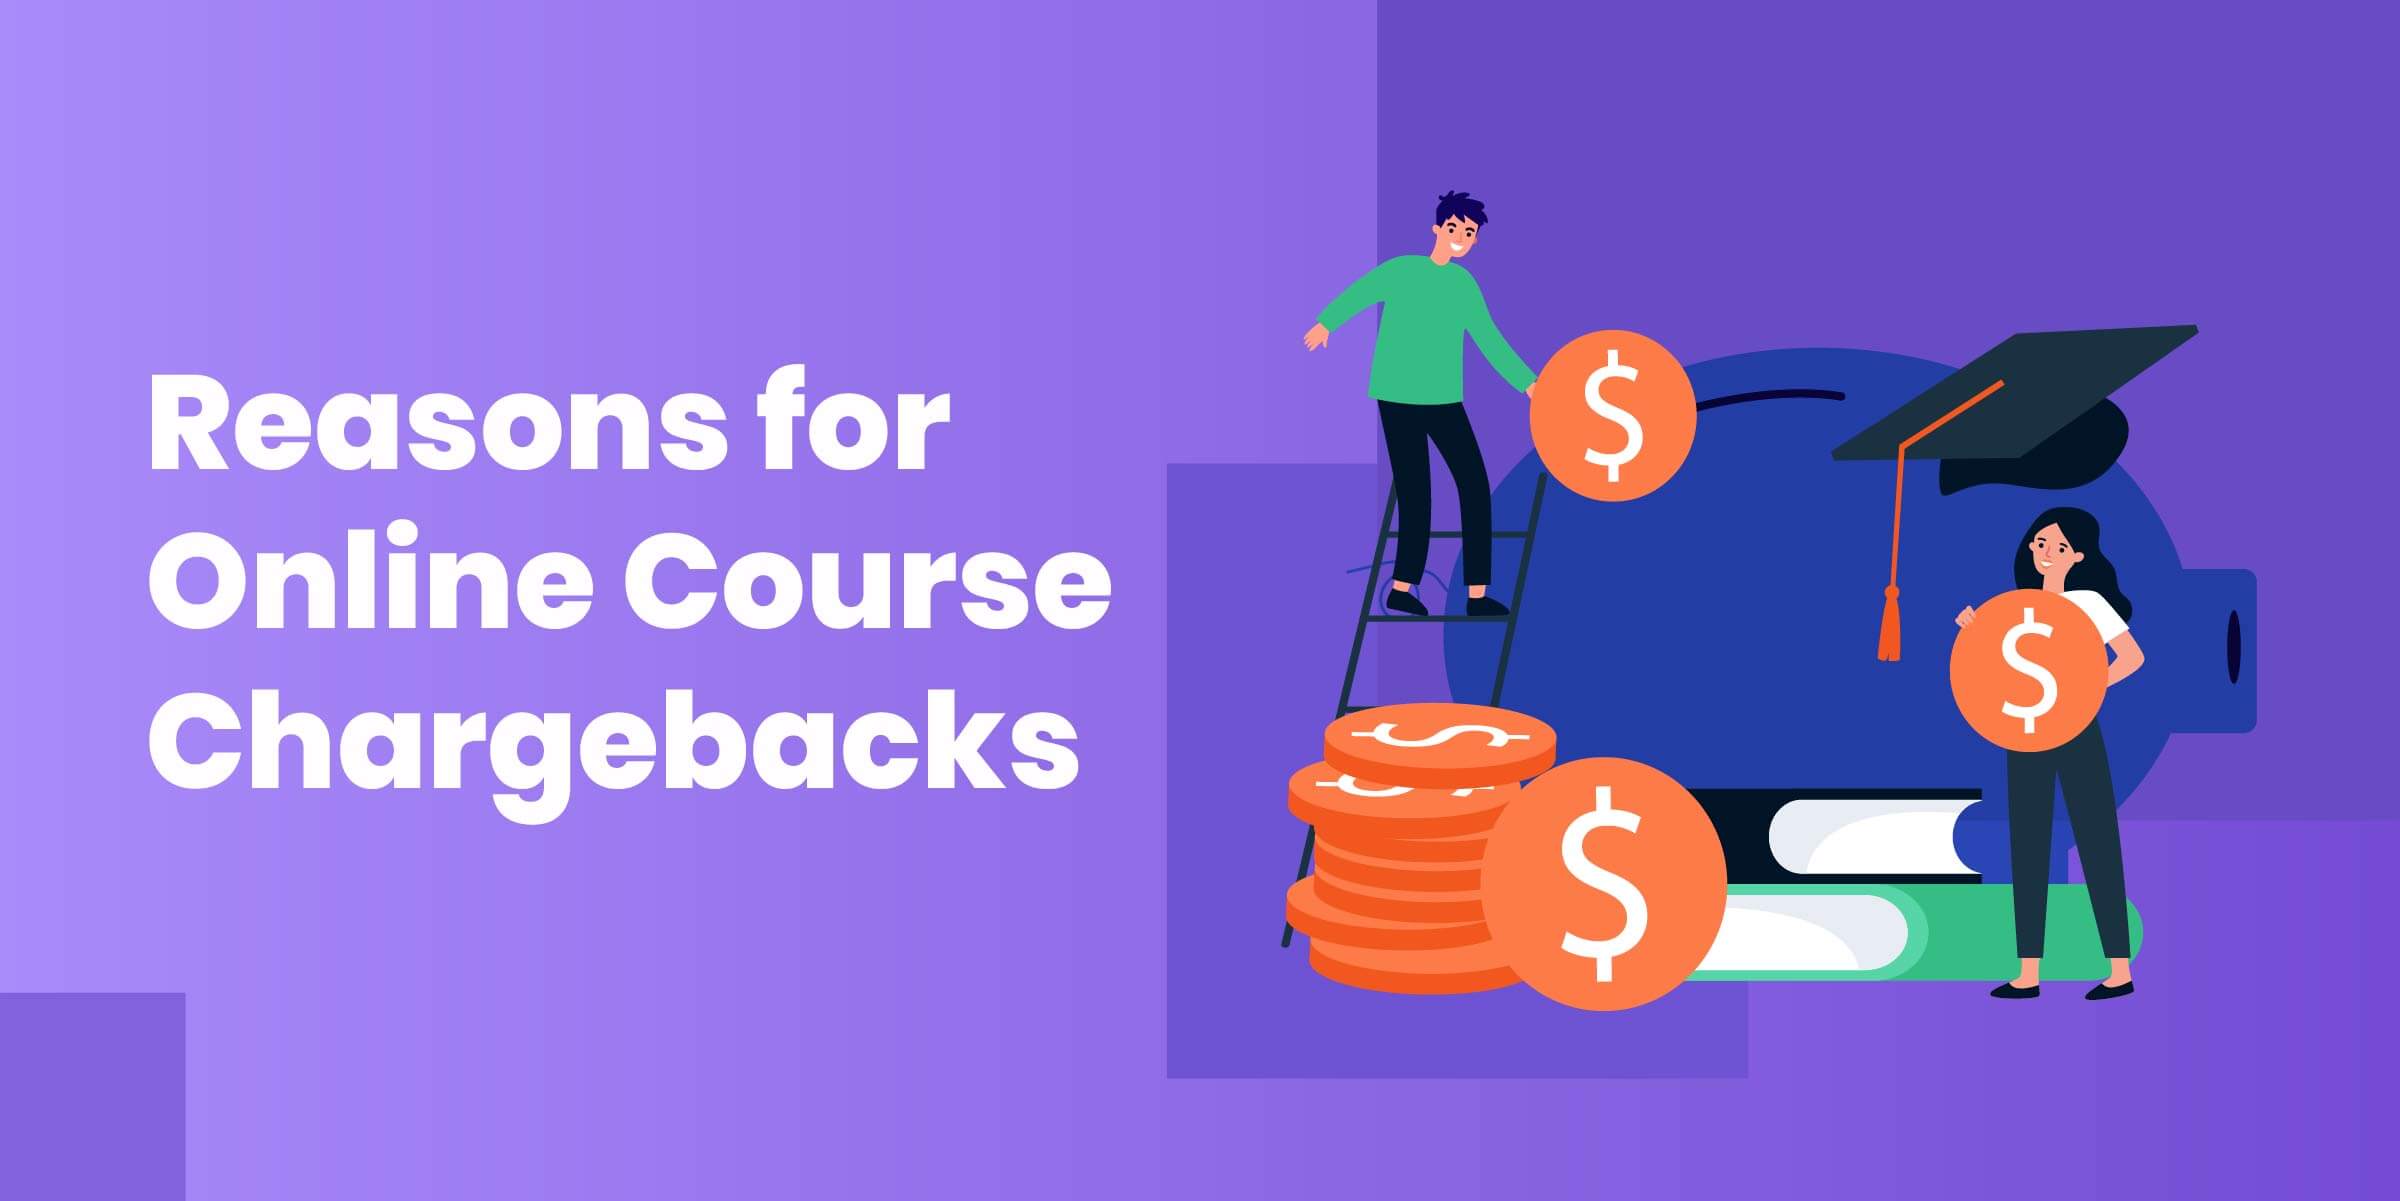 Reasons for Online Course Chargeback